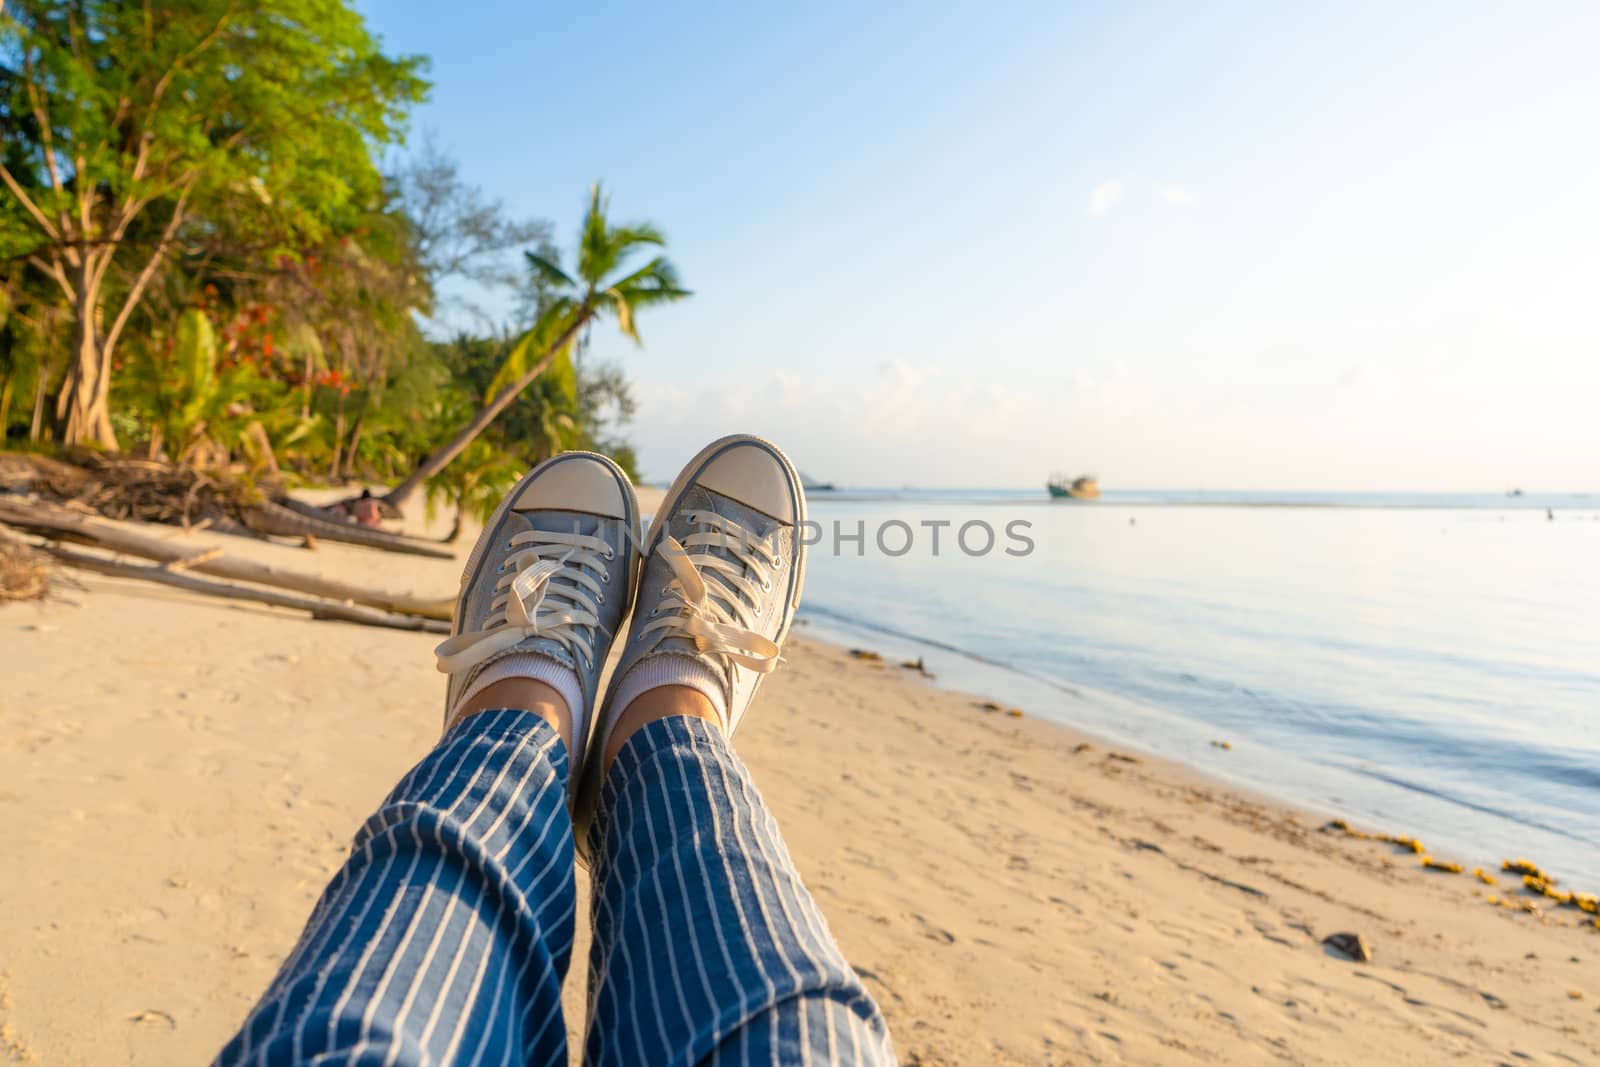 First-person view, a girl swinging on a swing on a sandy beach of a tropical island at sunset. Enjoys the vacation